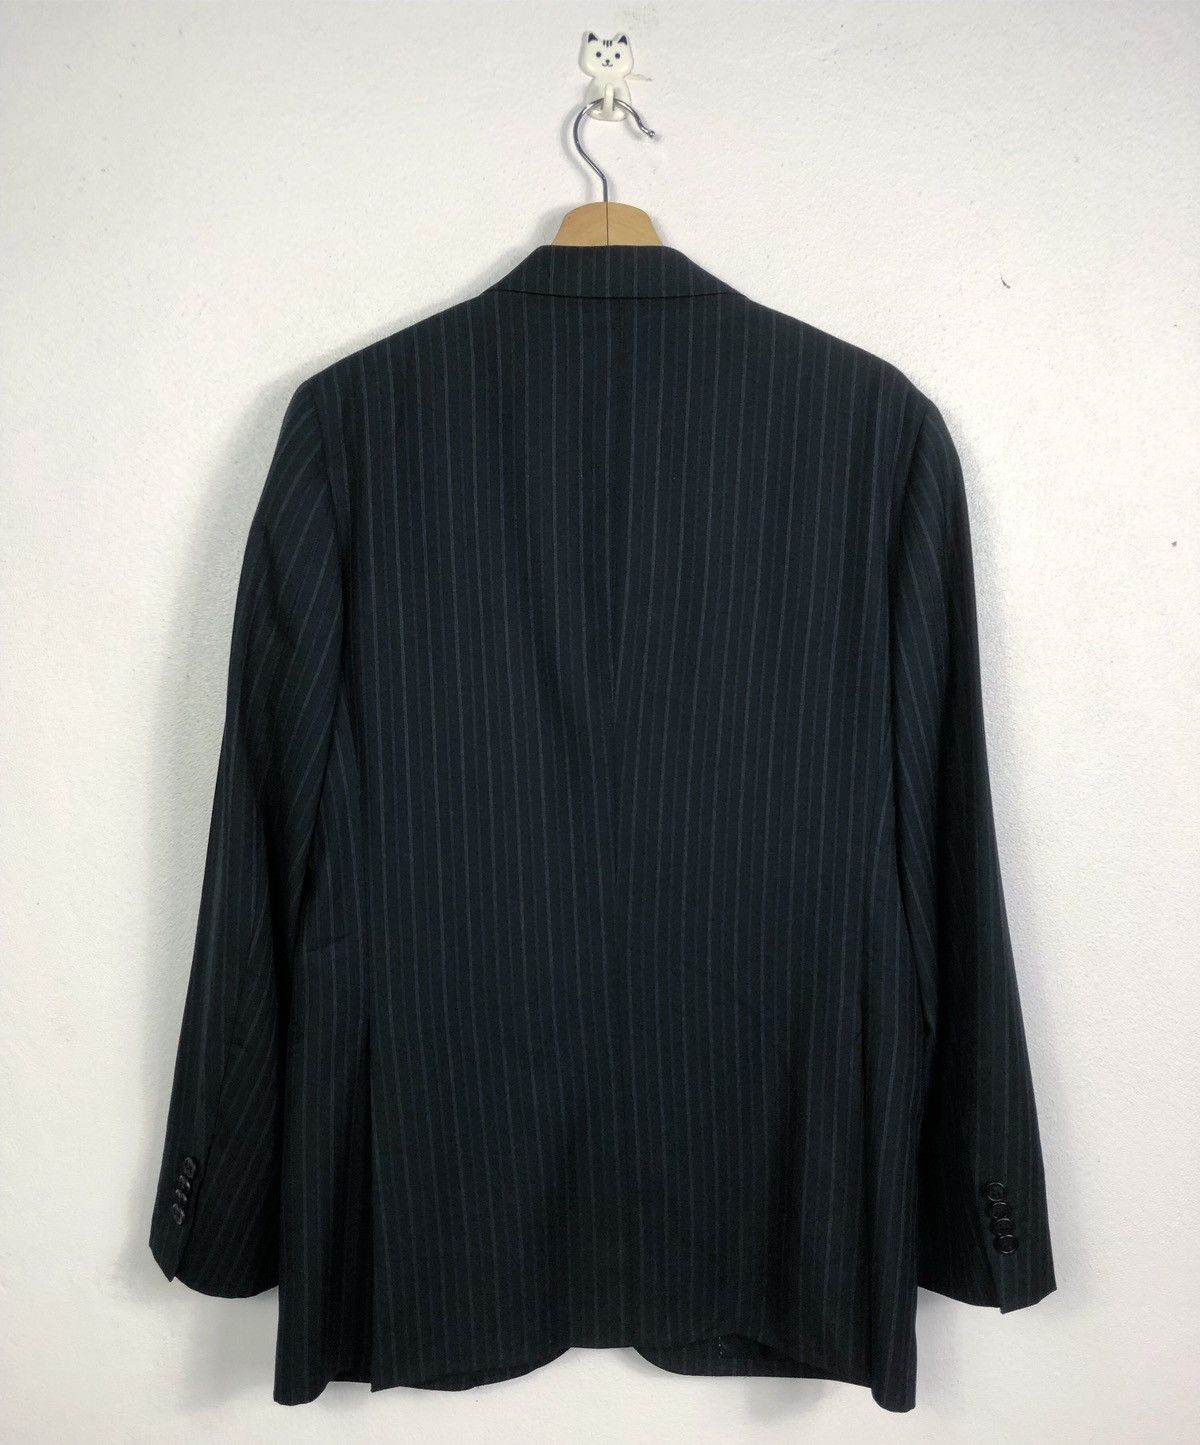 Paul Smith Rare Paul Smith London Blazer Suit Made in Italy Size US L / EU 52-54 / 3 - 6 Thumbnail